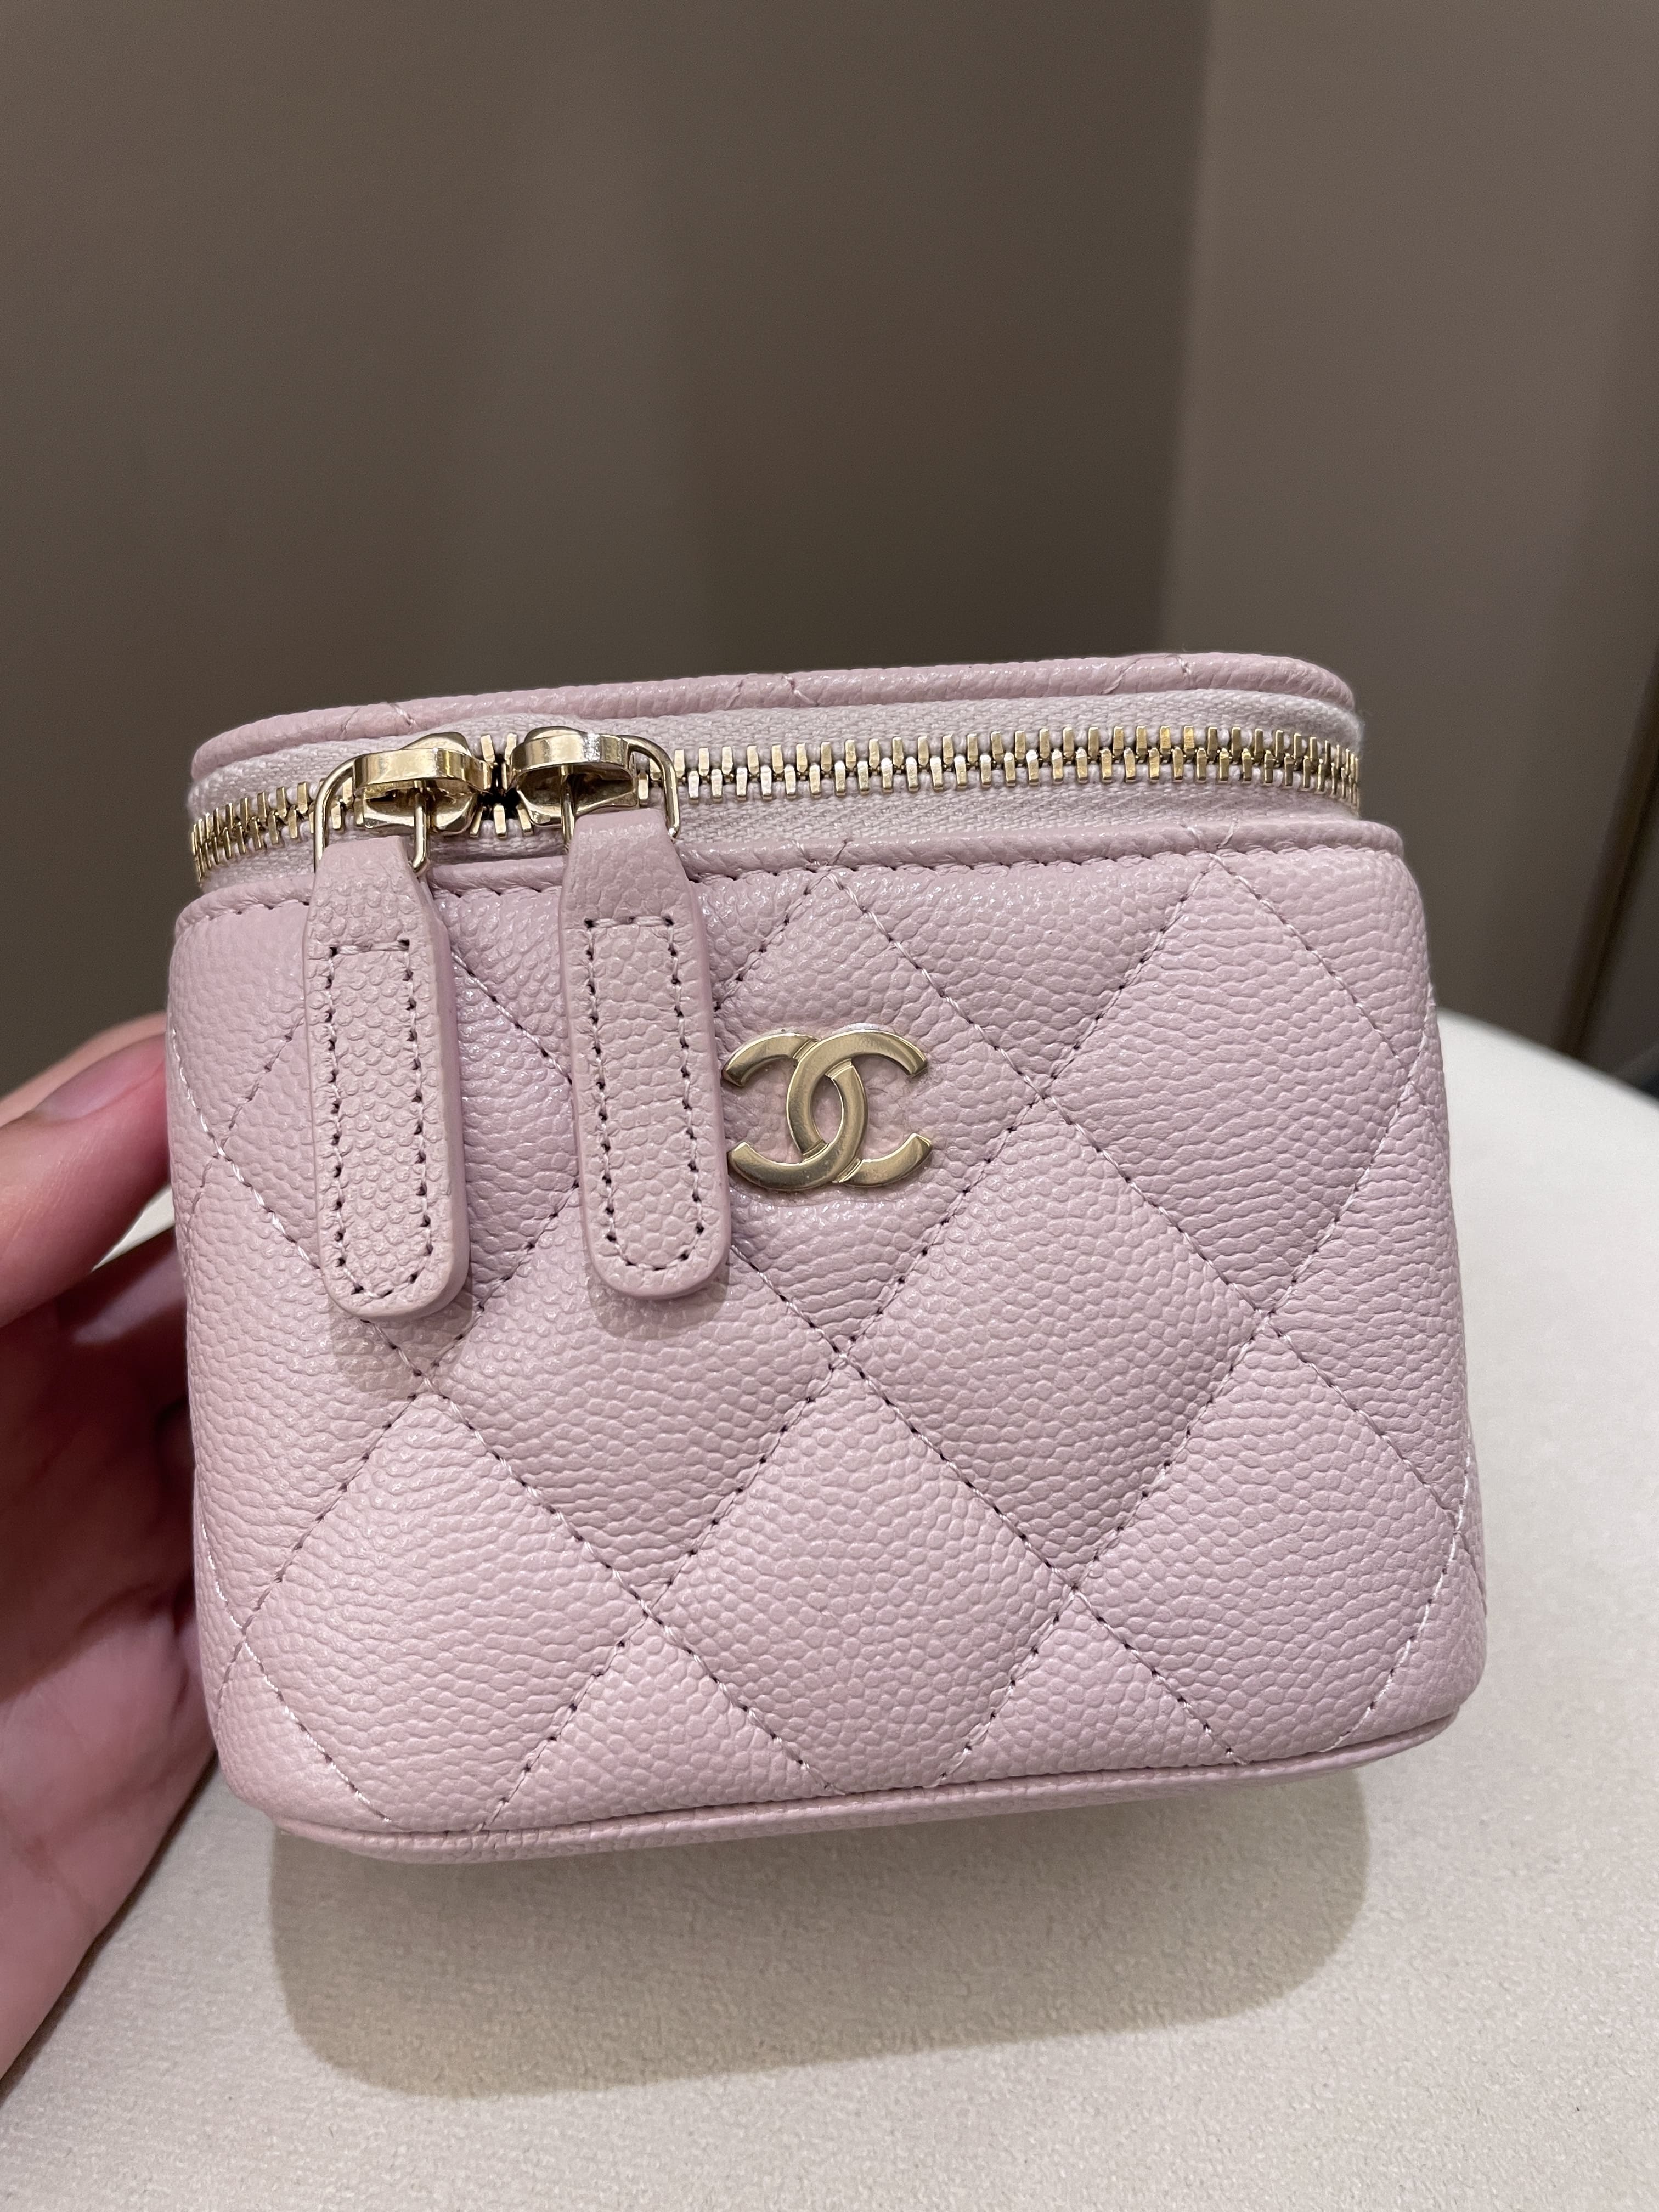 DEAL! 💕 Chanel Mini Square Caviar Nude Beige Clair with pinkish